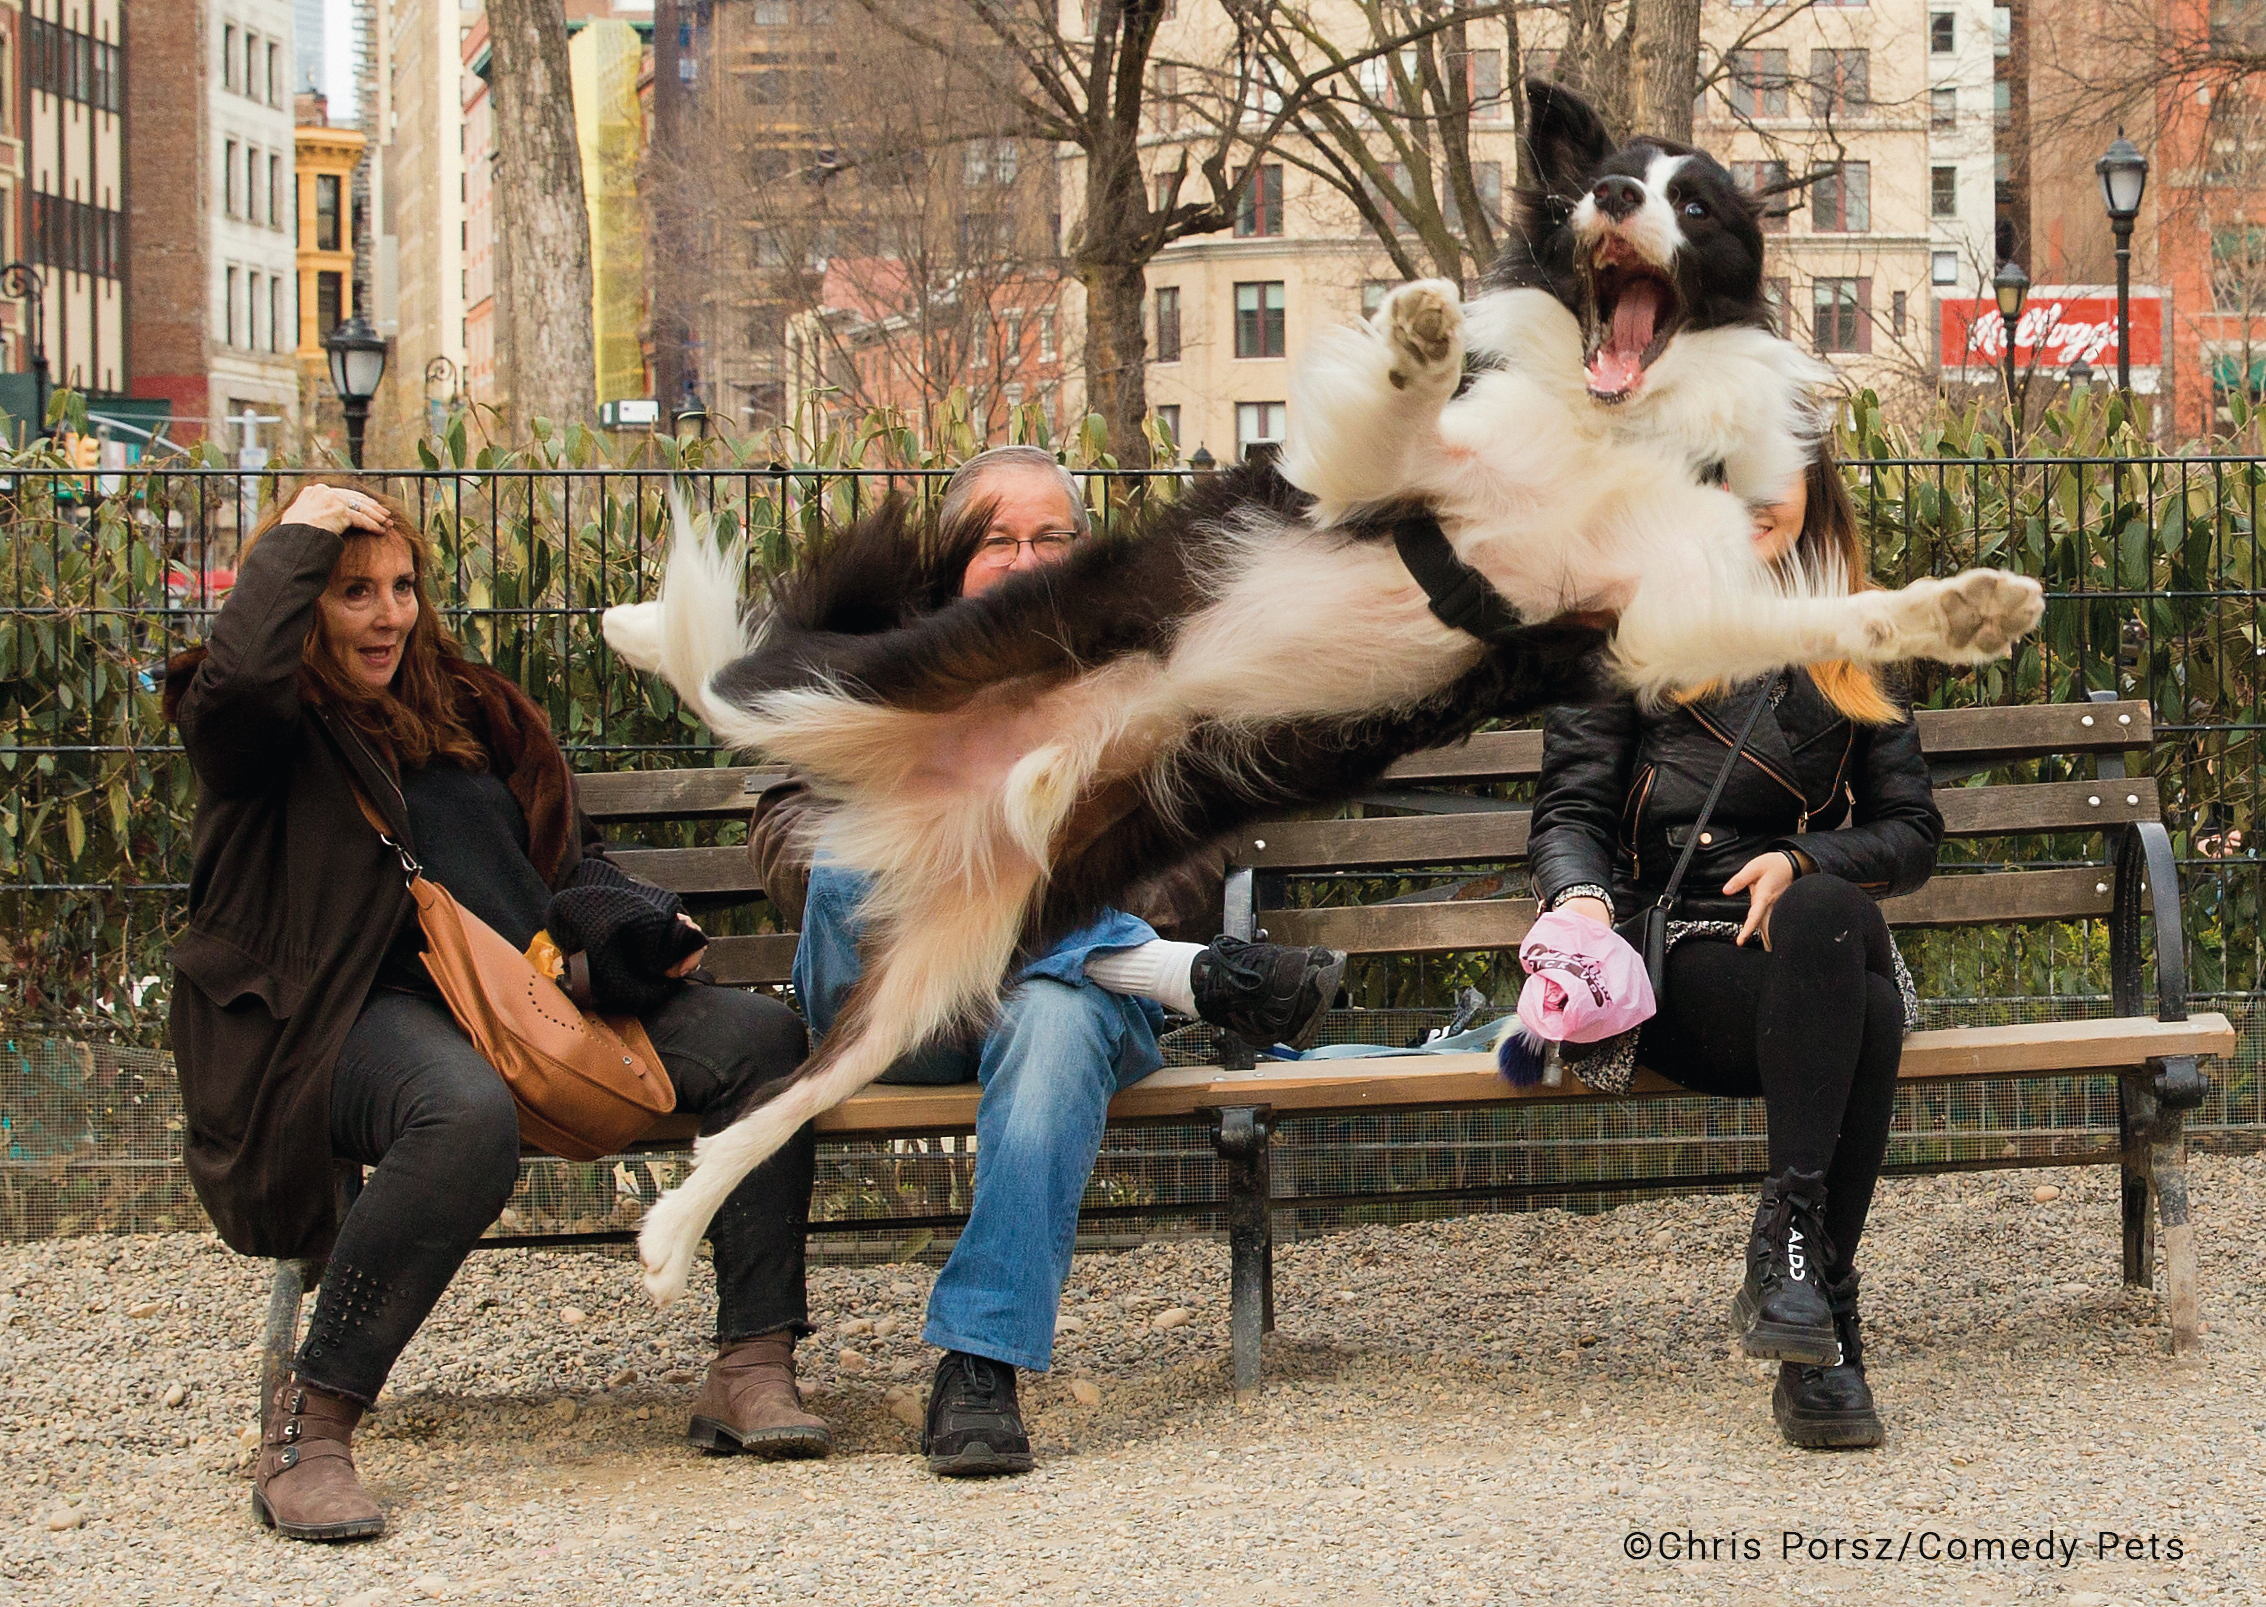 Dog jumping into the air in front of three surprised people on a bench.